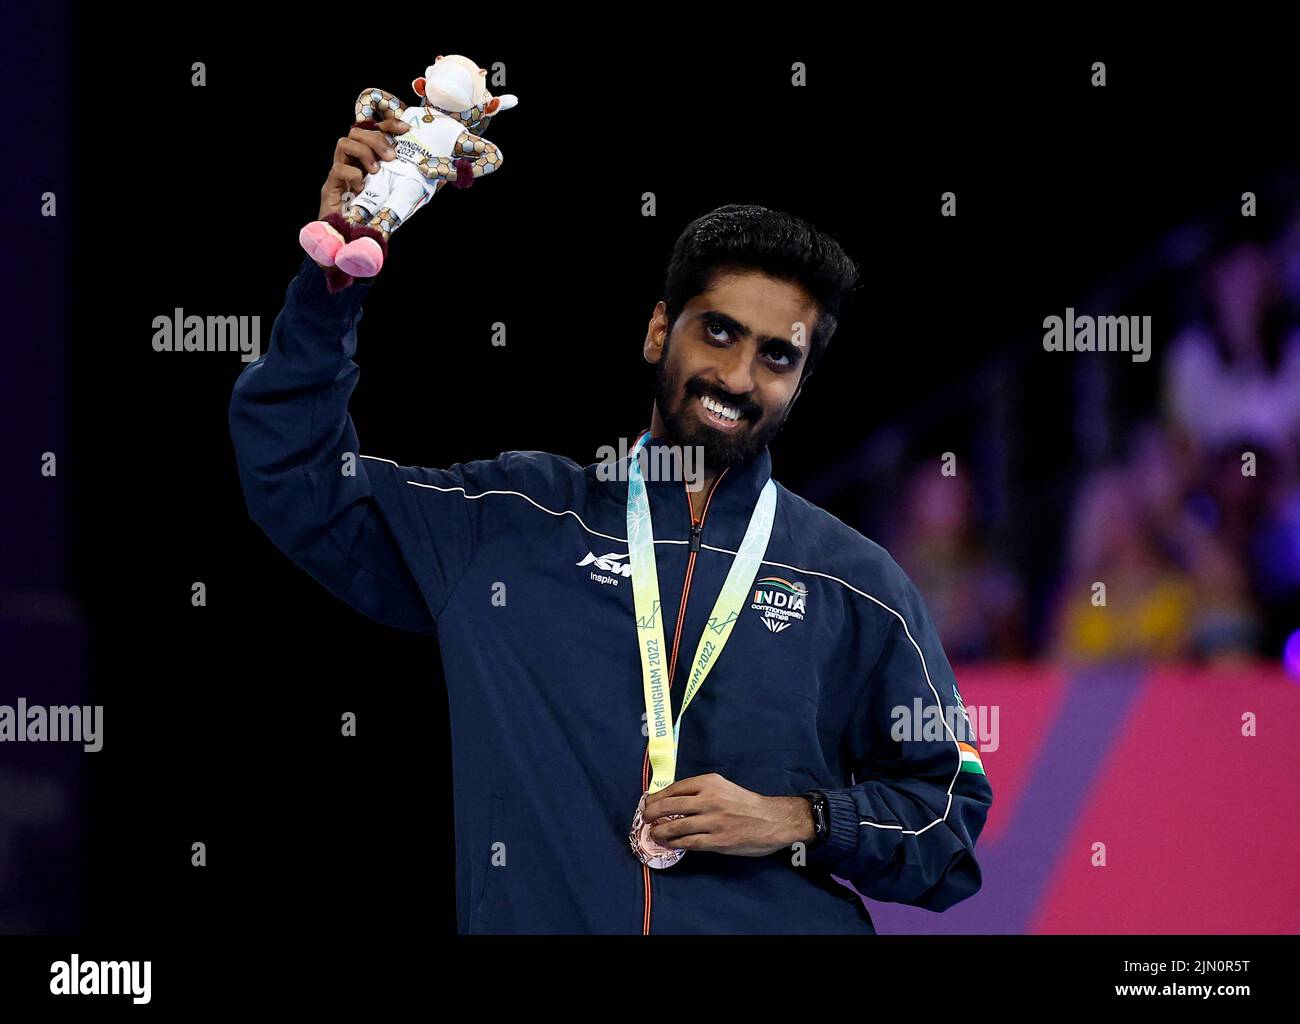 Commonwealth Games - Table Tennis - Men's Singles - Medal Ceremony - The NEC Hall 3, Birmingham, Britain - August 8, 2022 Bronze medallist India's Sathiyan Gnanasekaran celebrates on the podium during the medal ceremony REUTERS/Jason Cairnduff Stock Photo